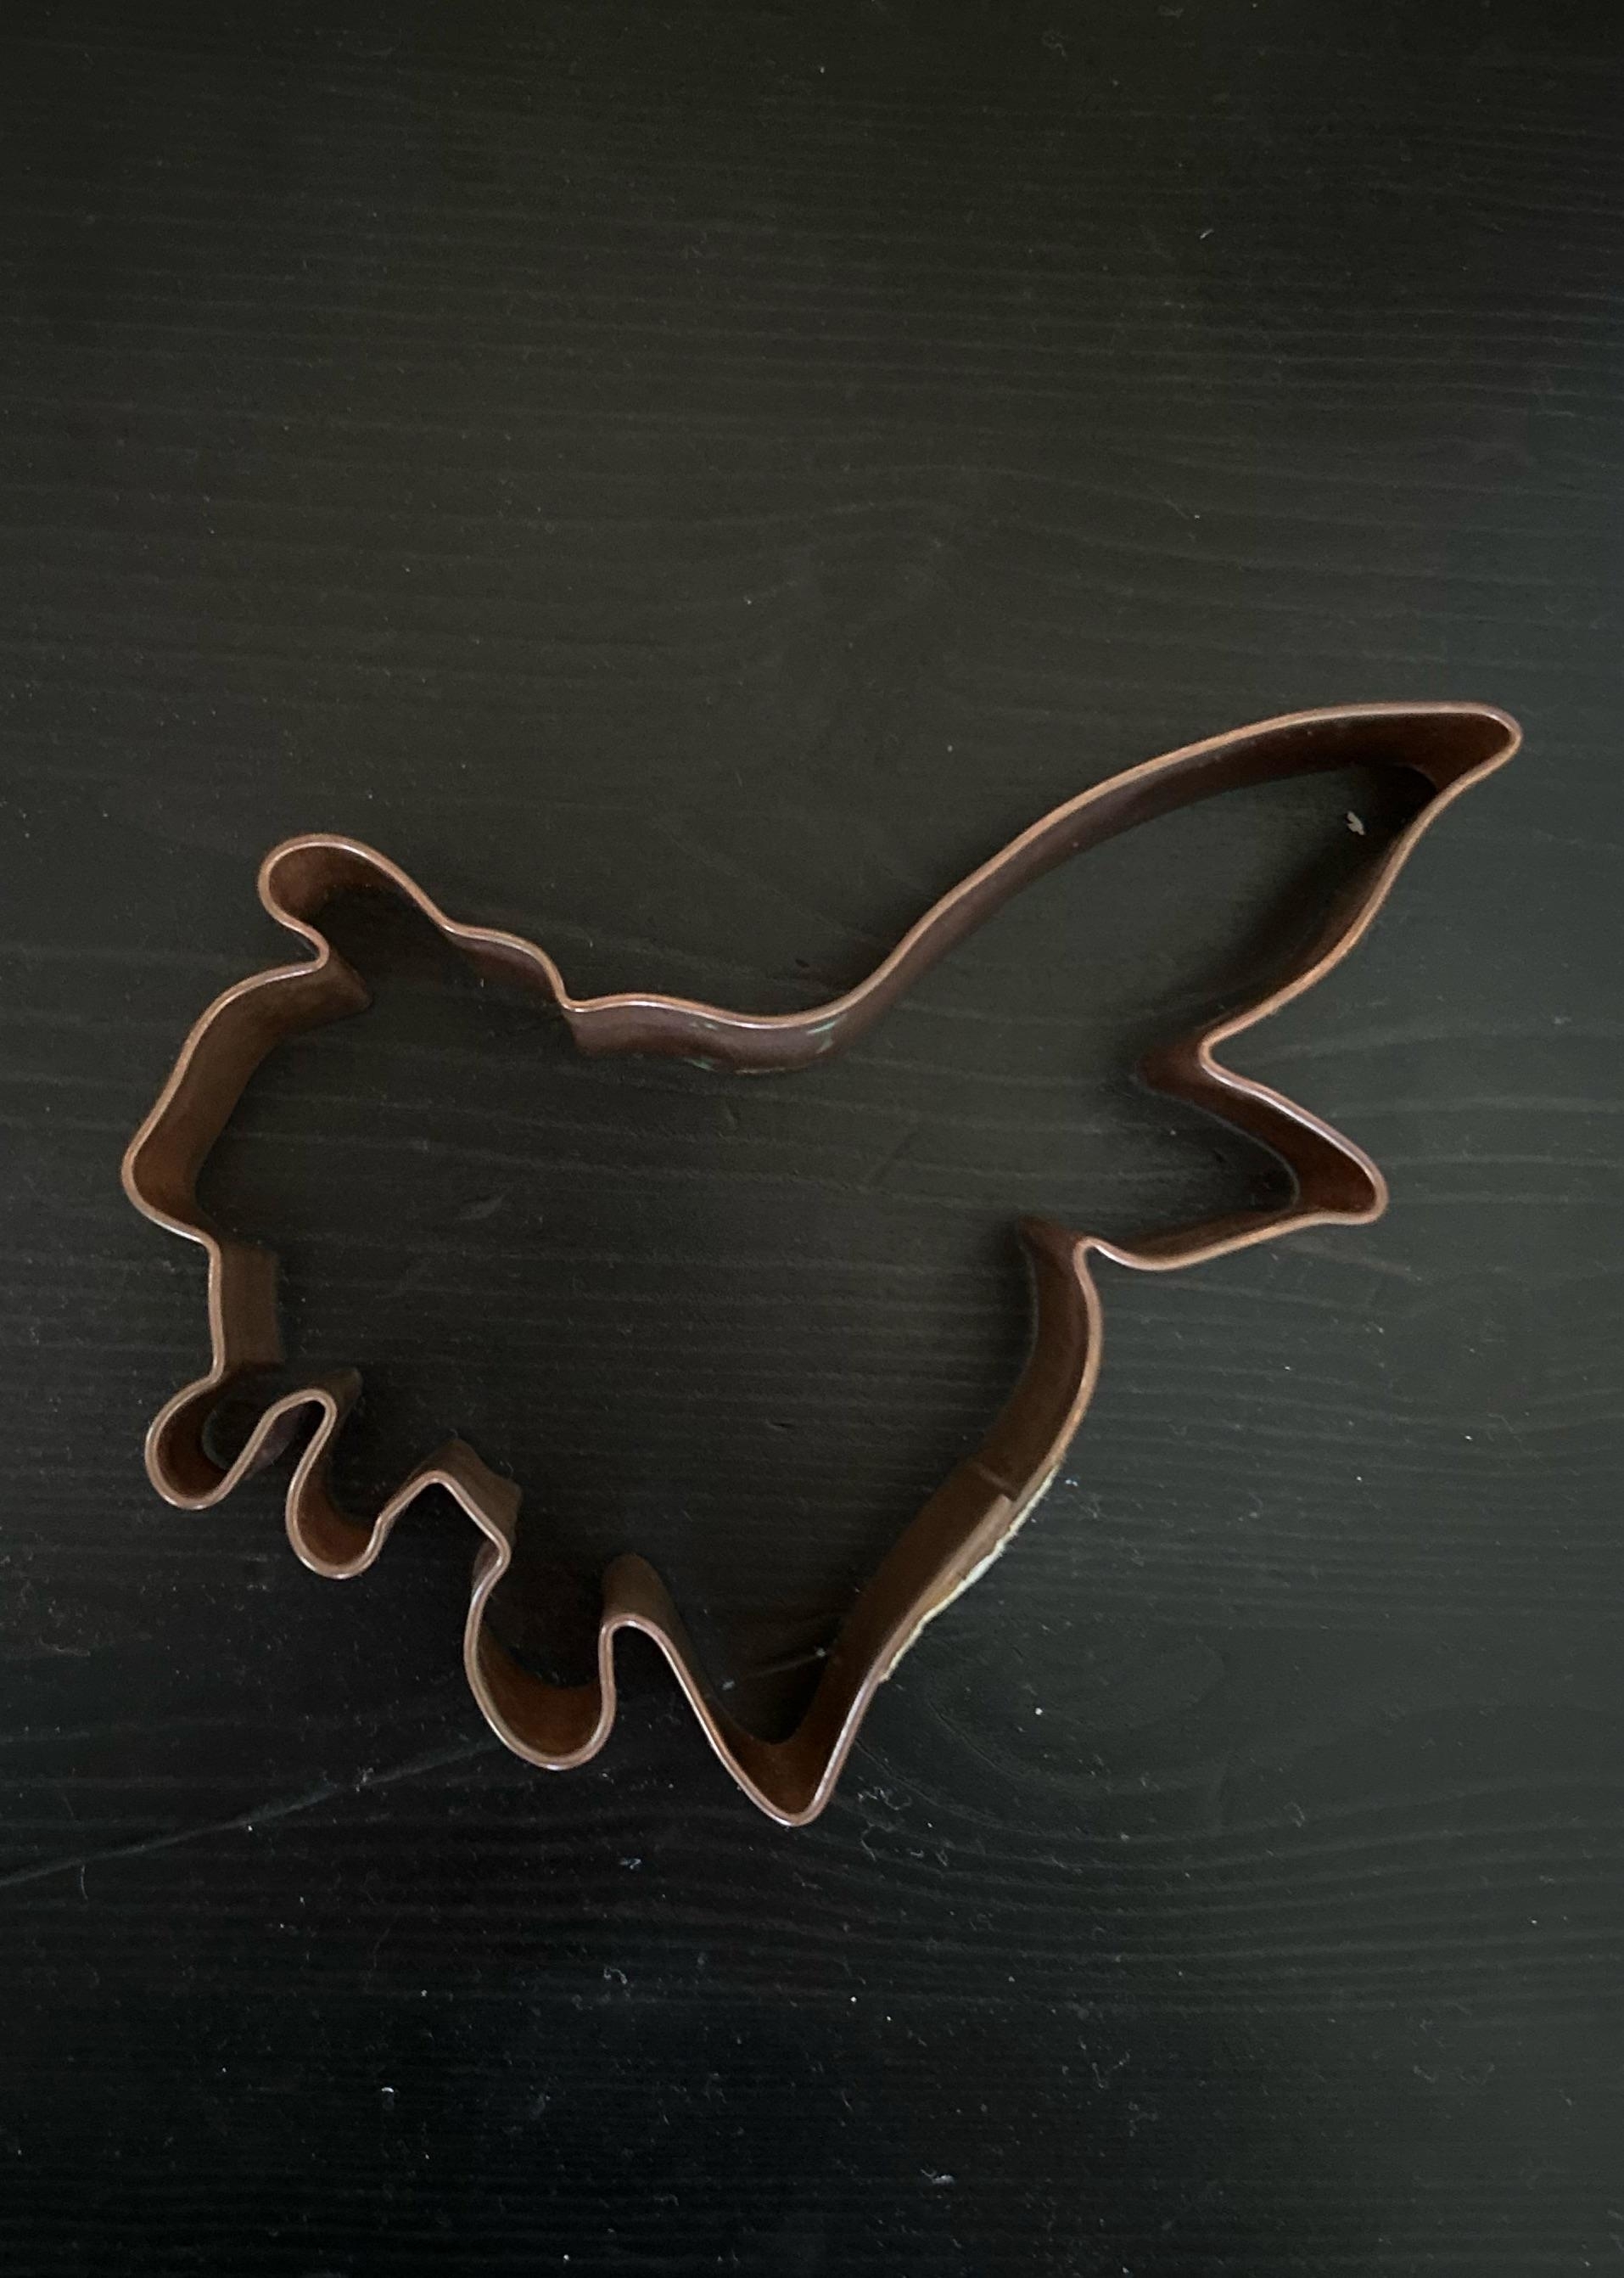 A cookie cutter that&#x27;s difficult to identify but could be a misshapen animal